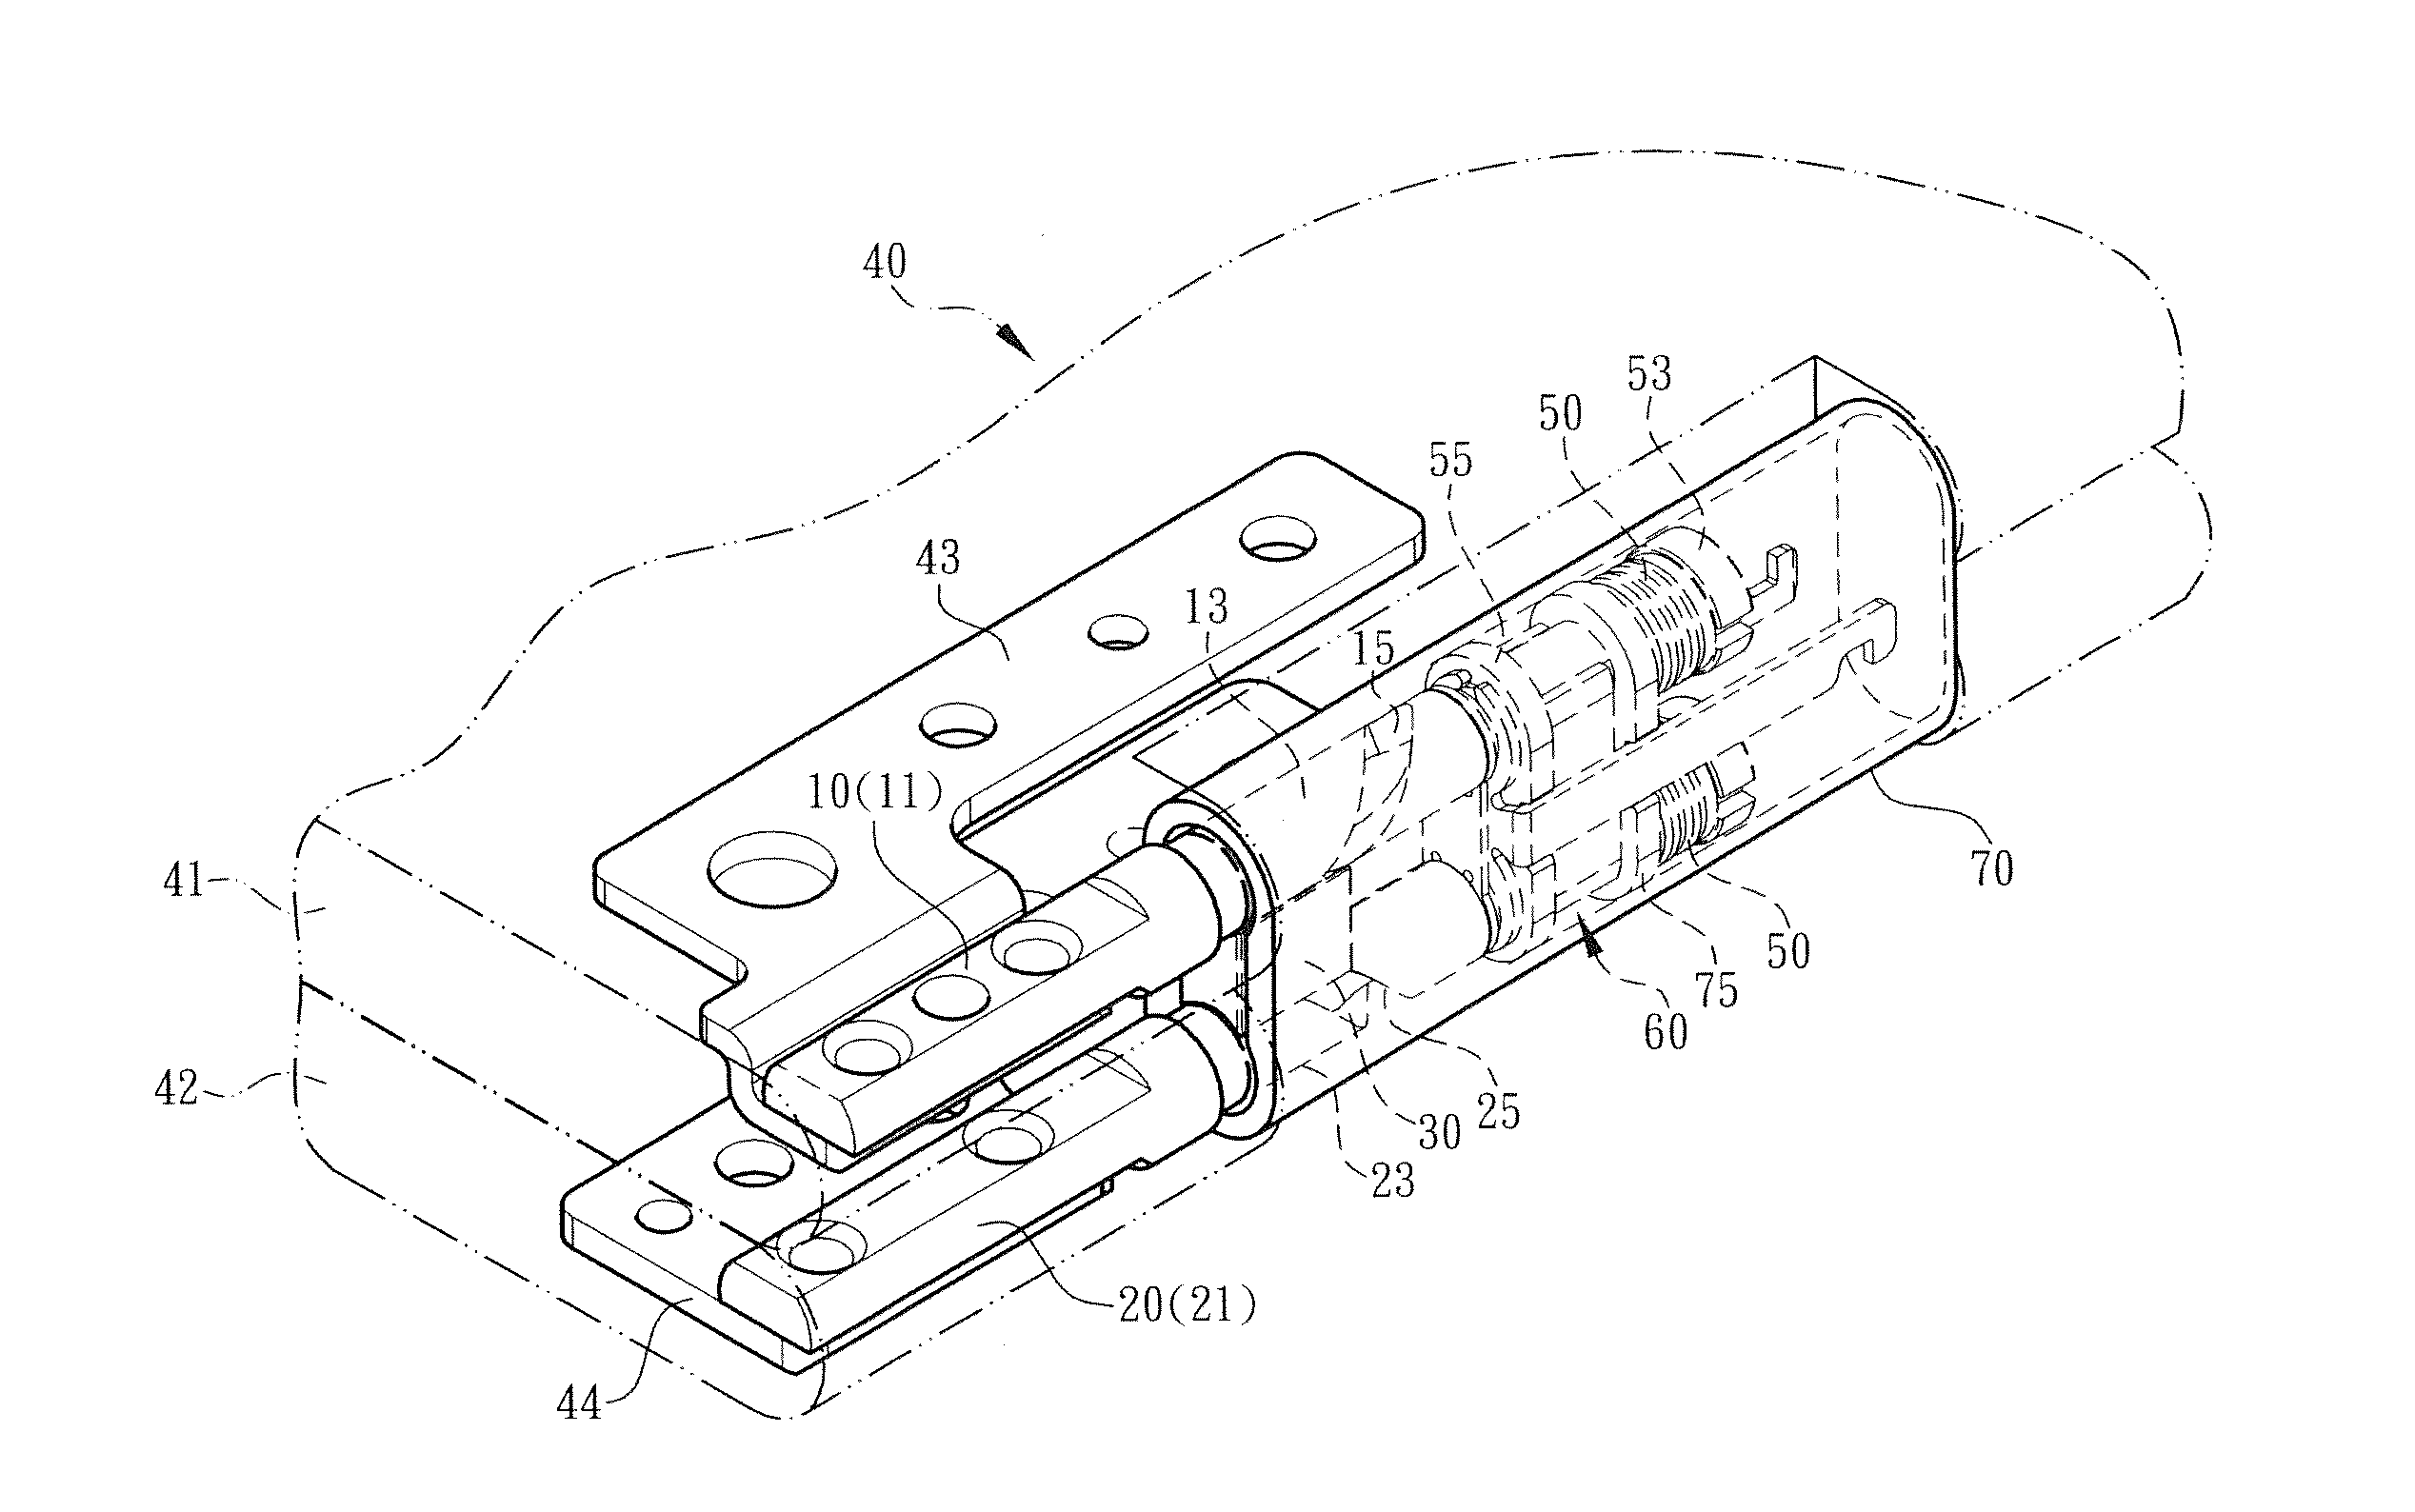 Torque balancing device applied to synchronous dual-shaft system